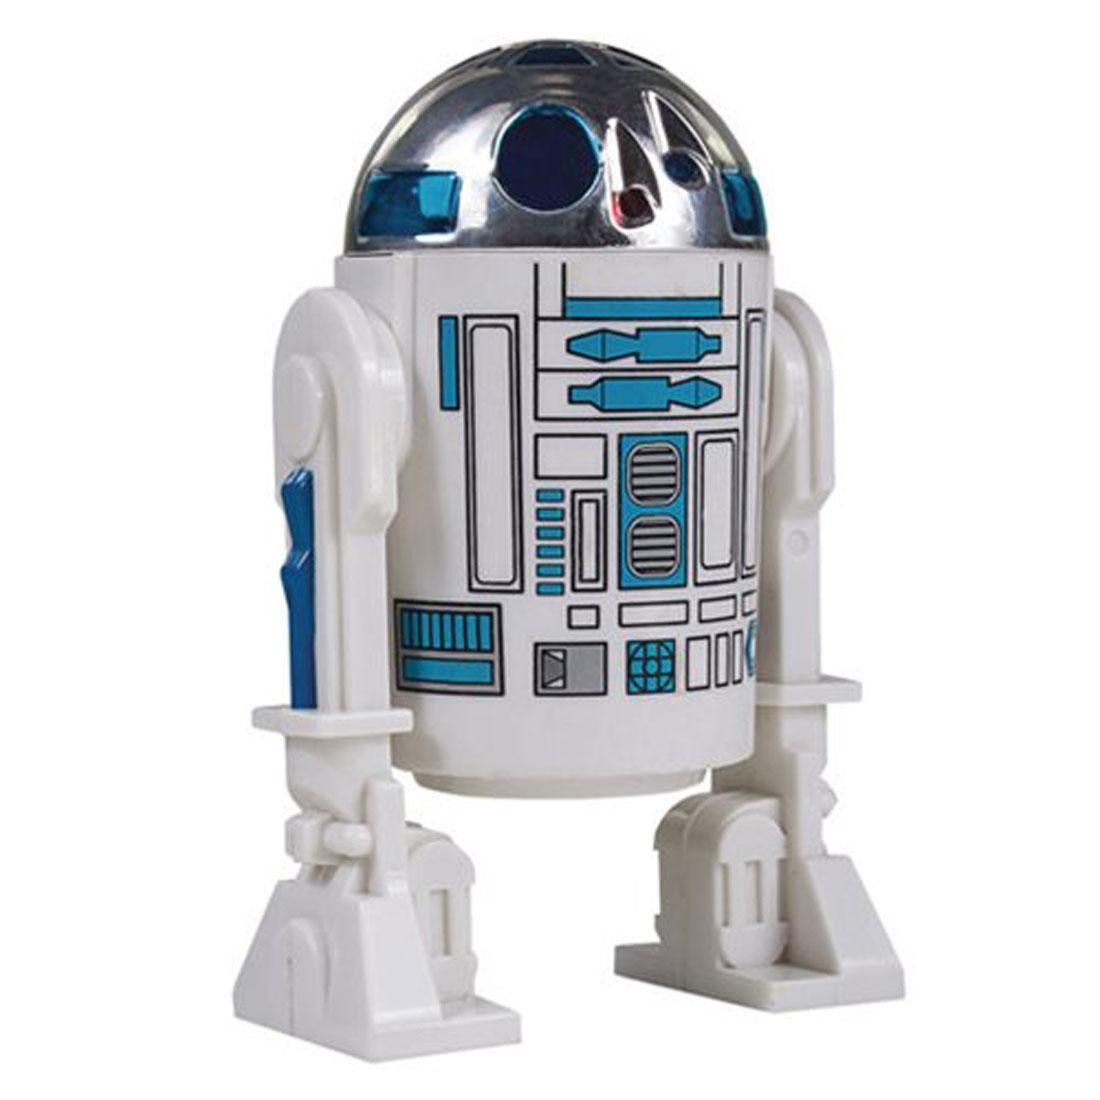 Gentle Giant Star Wars R2-D2 Life Size Vintage Kenner Monument Statue (white)